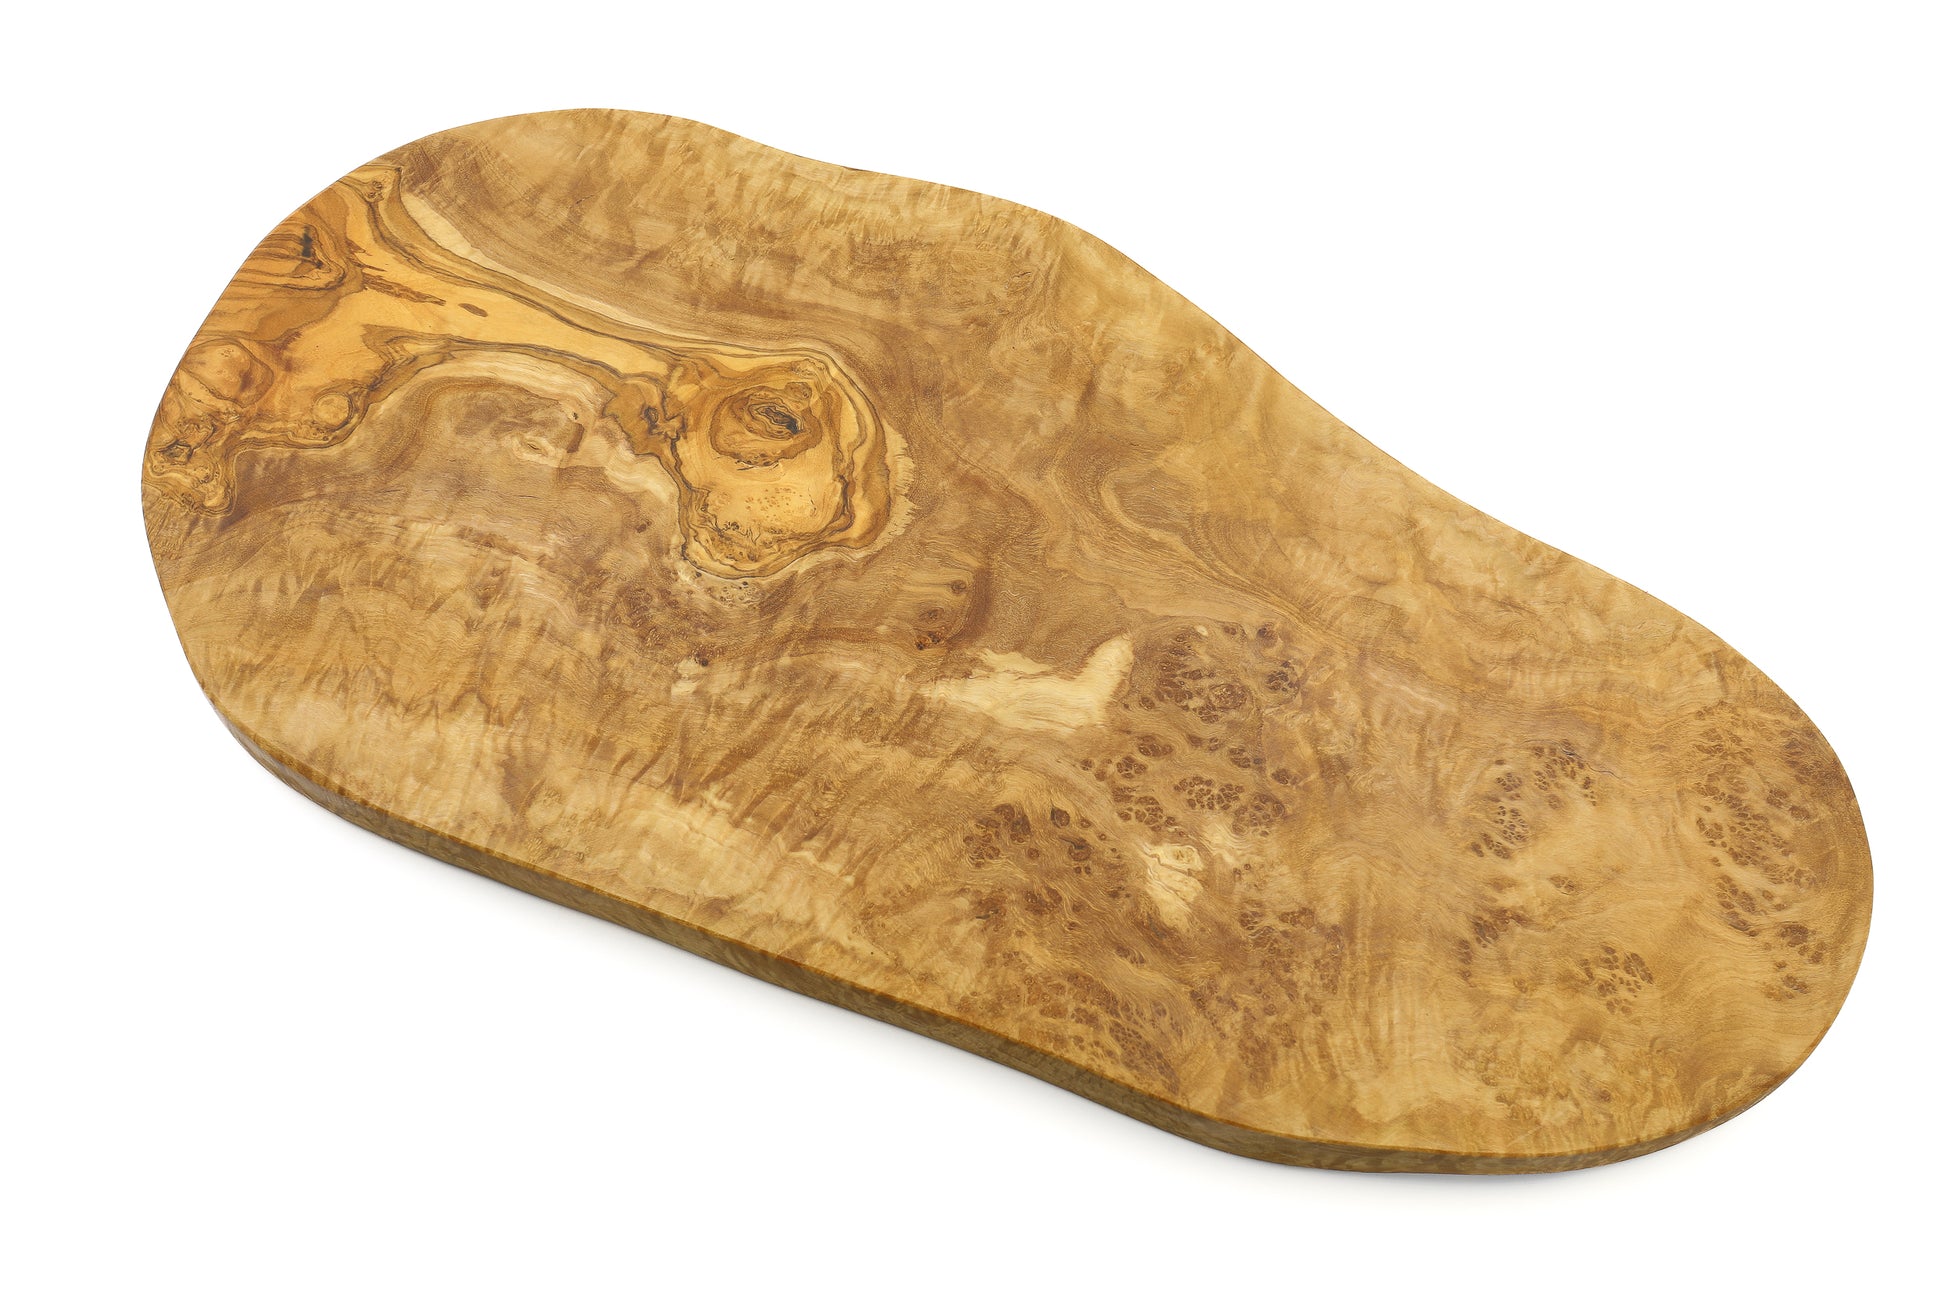 Unique olive wood cutting board with an organic and irregular form